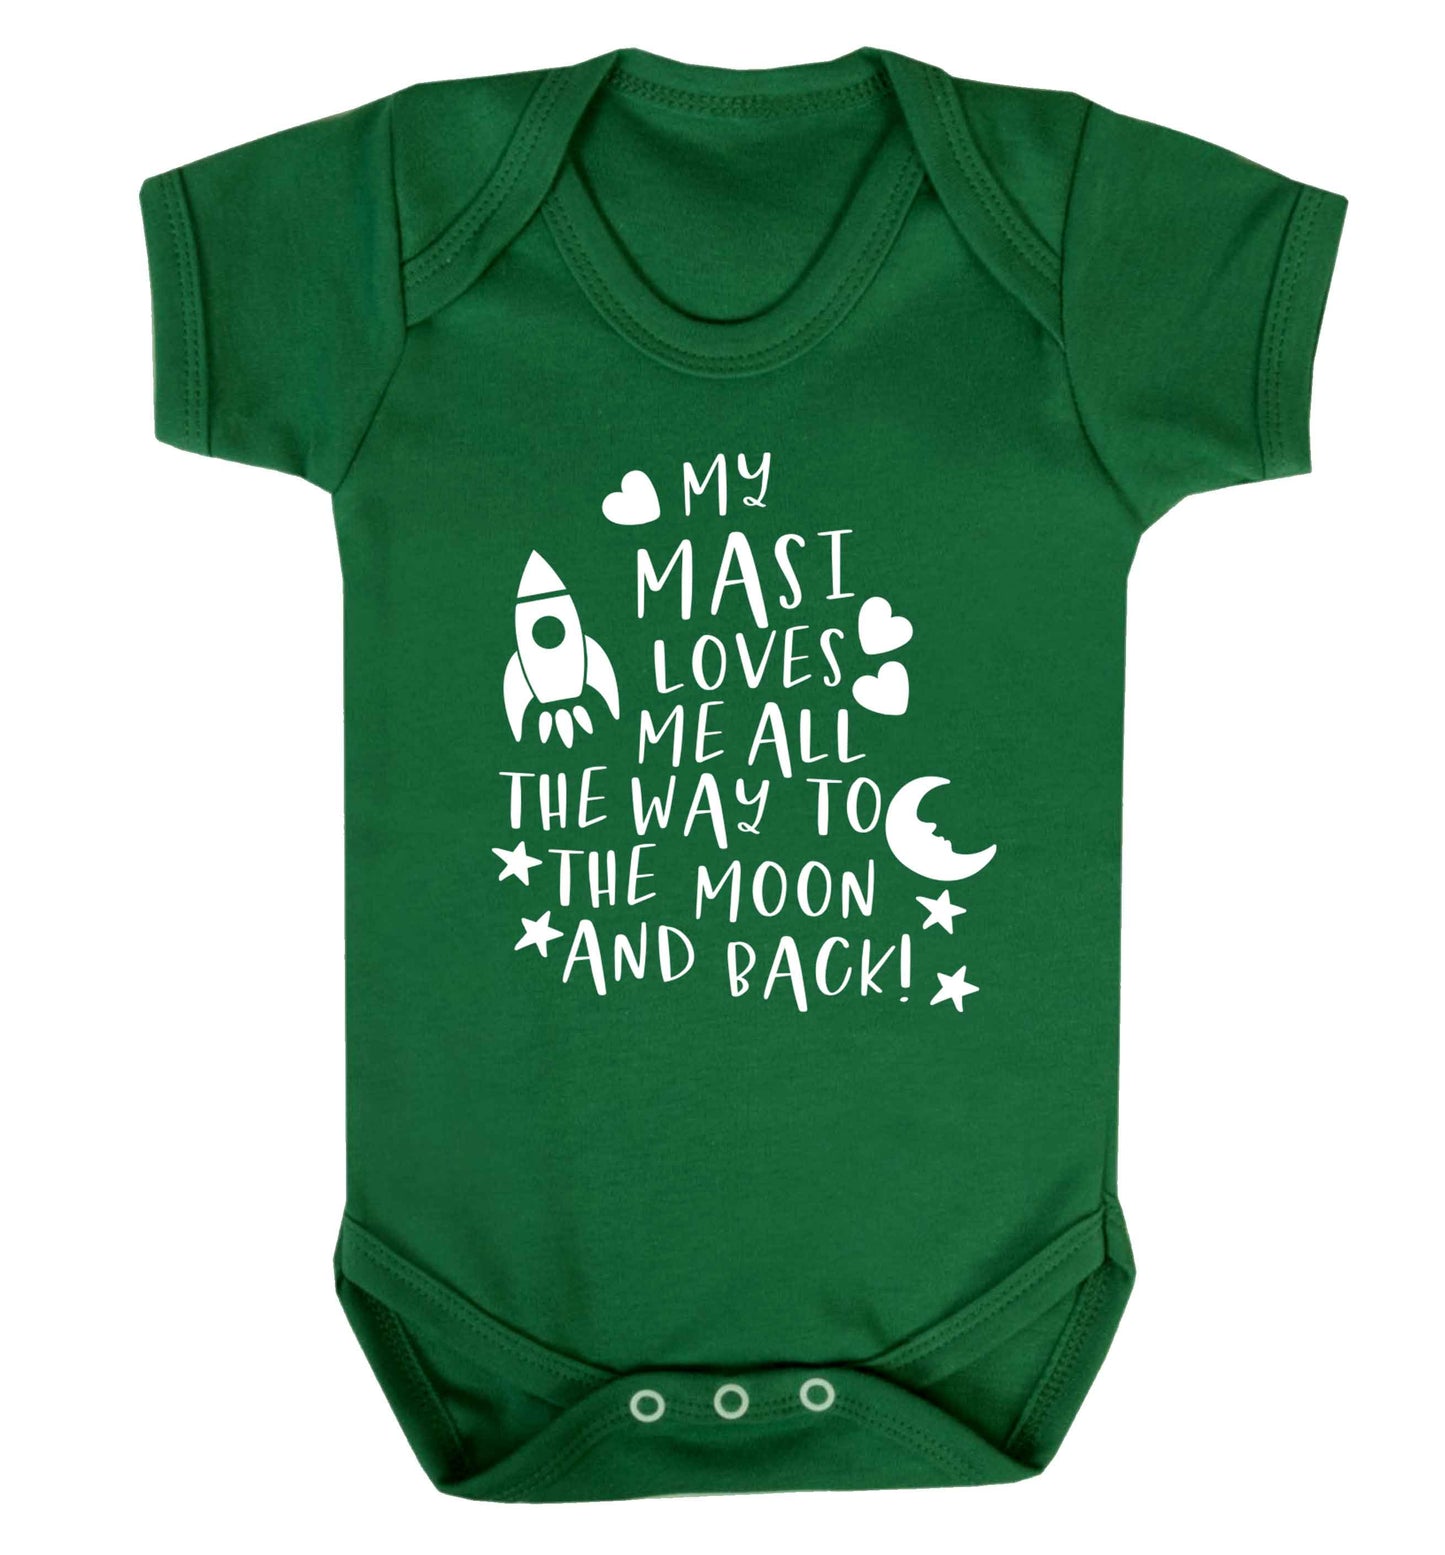 My masi loves me all the way to the moon and back Baby Vest green 18-24 months